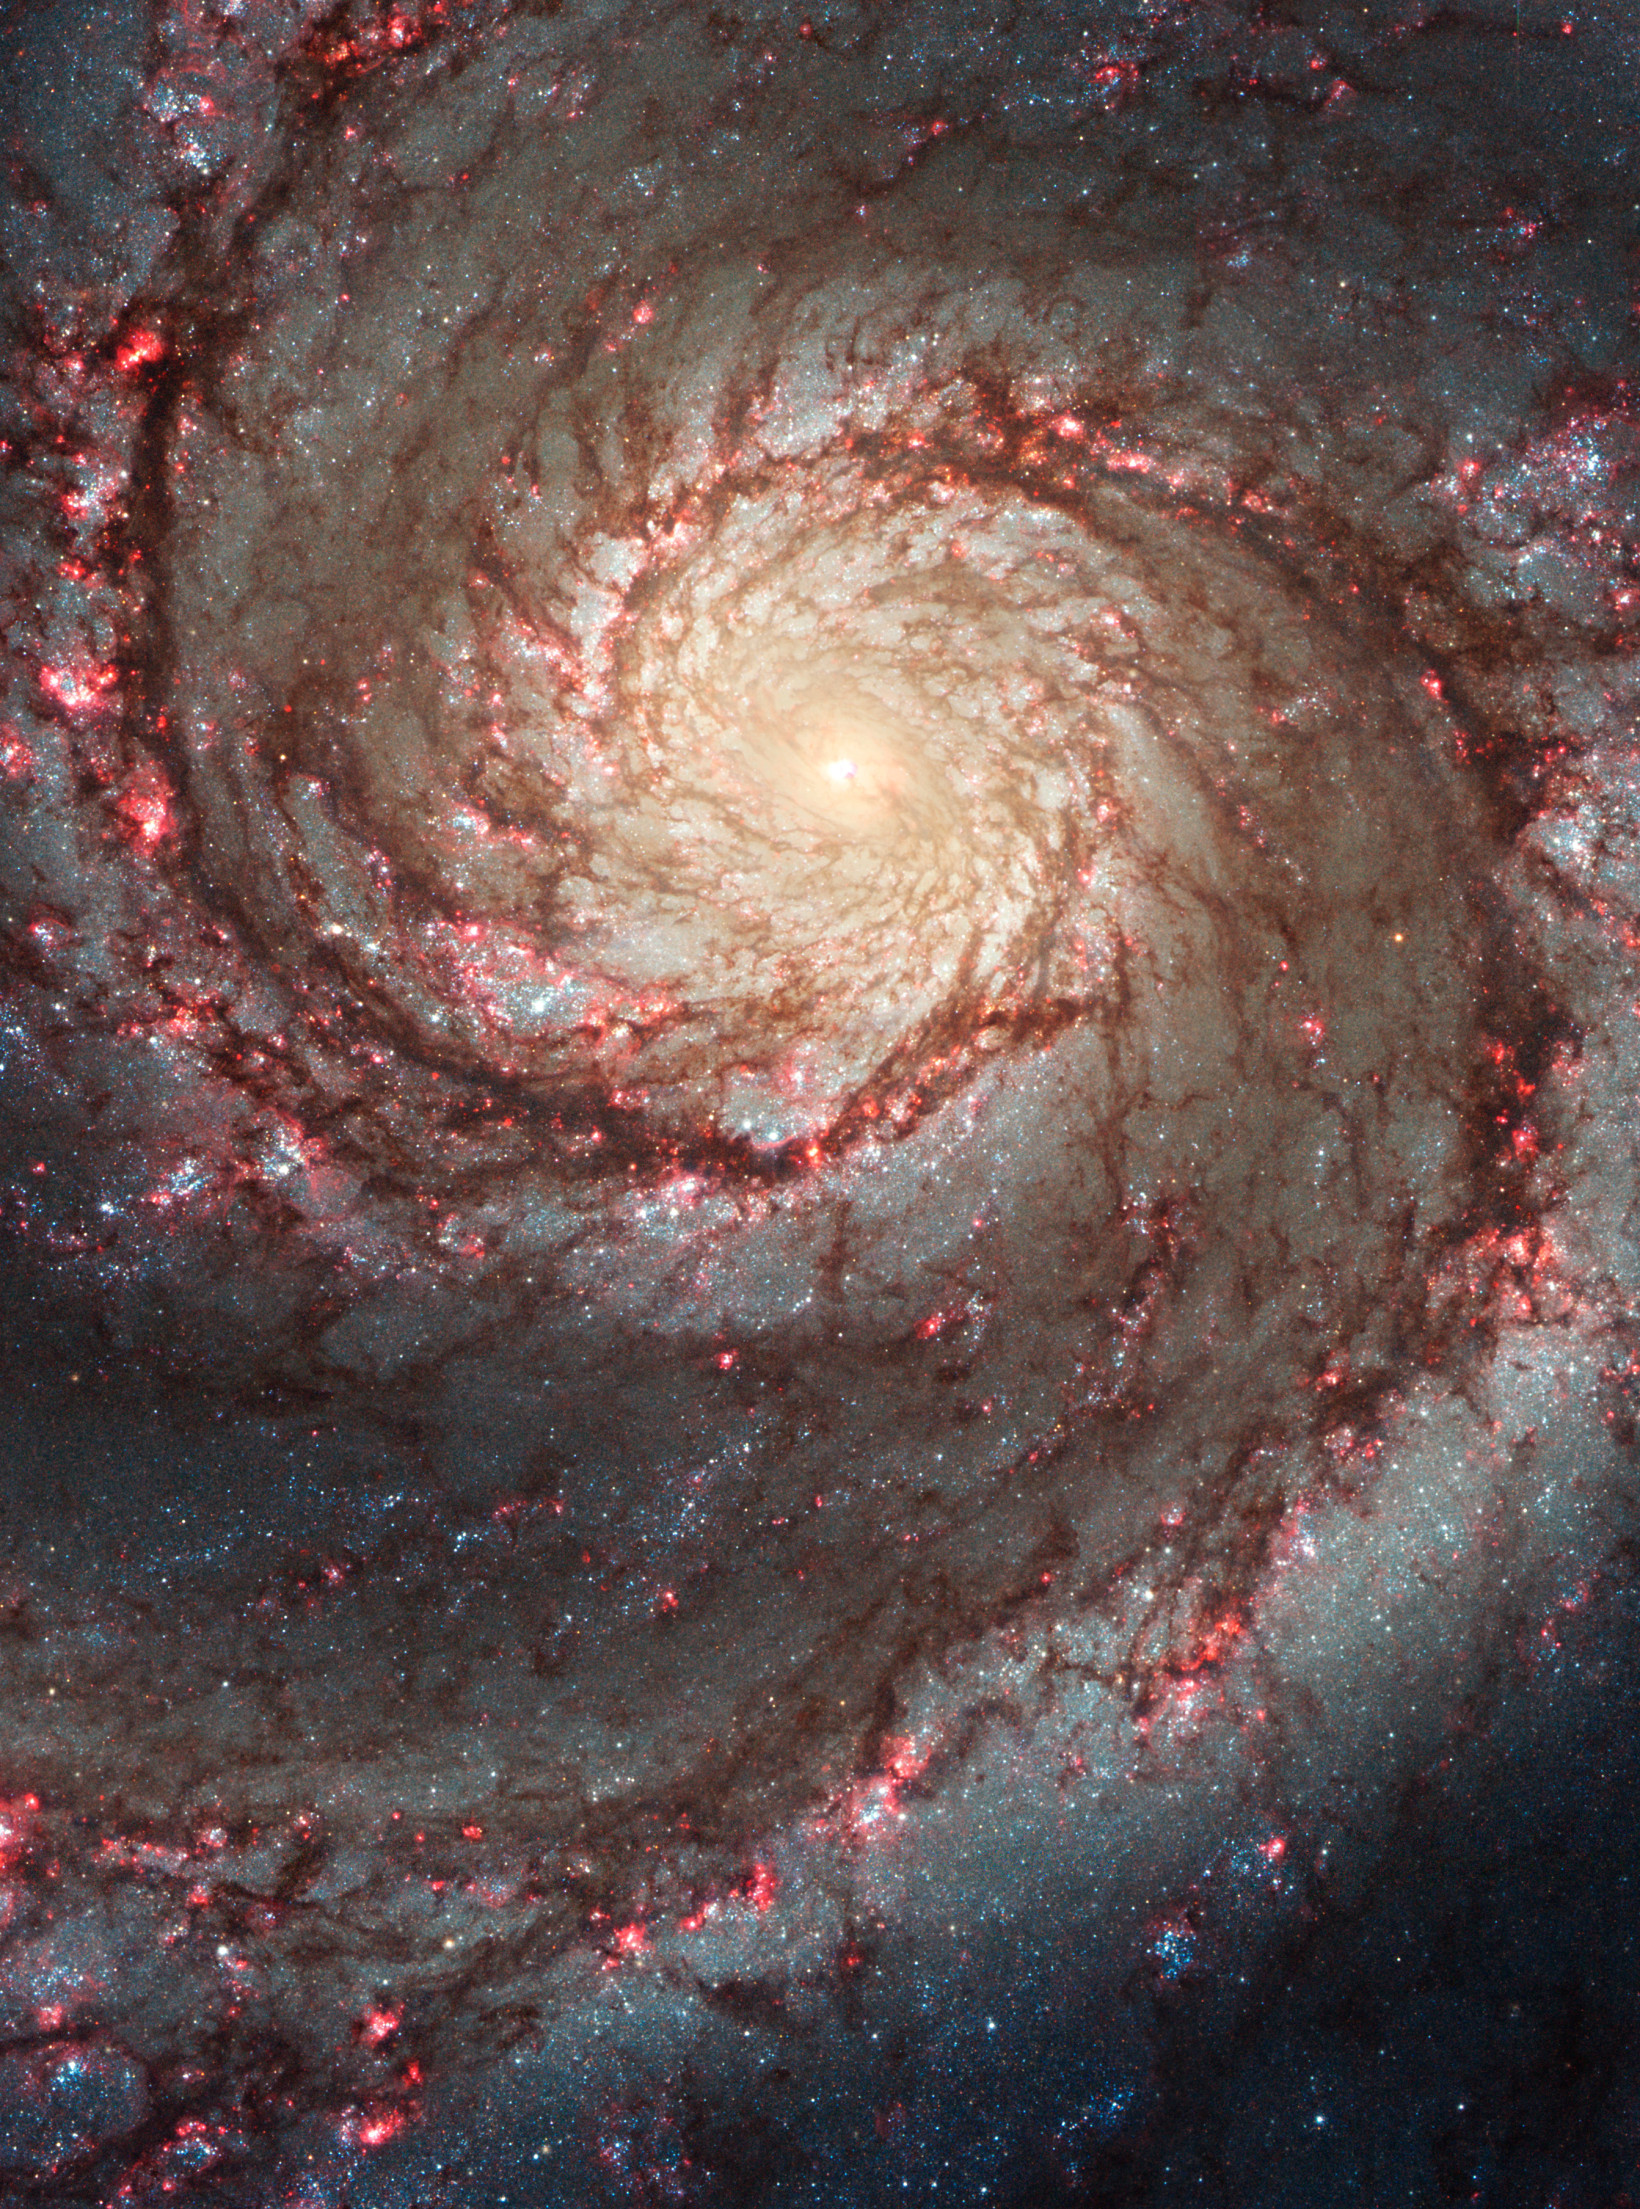 James Webb telescope captures clearest-ever image of Whirlpool galaxy